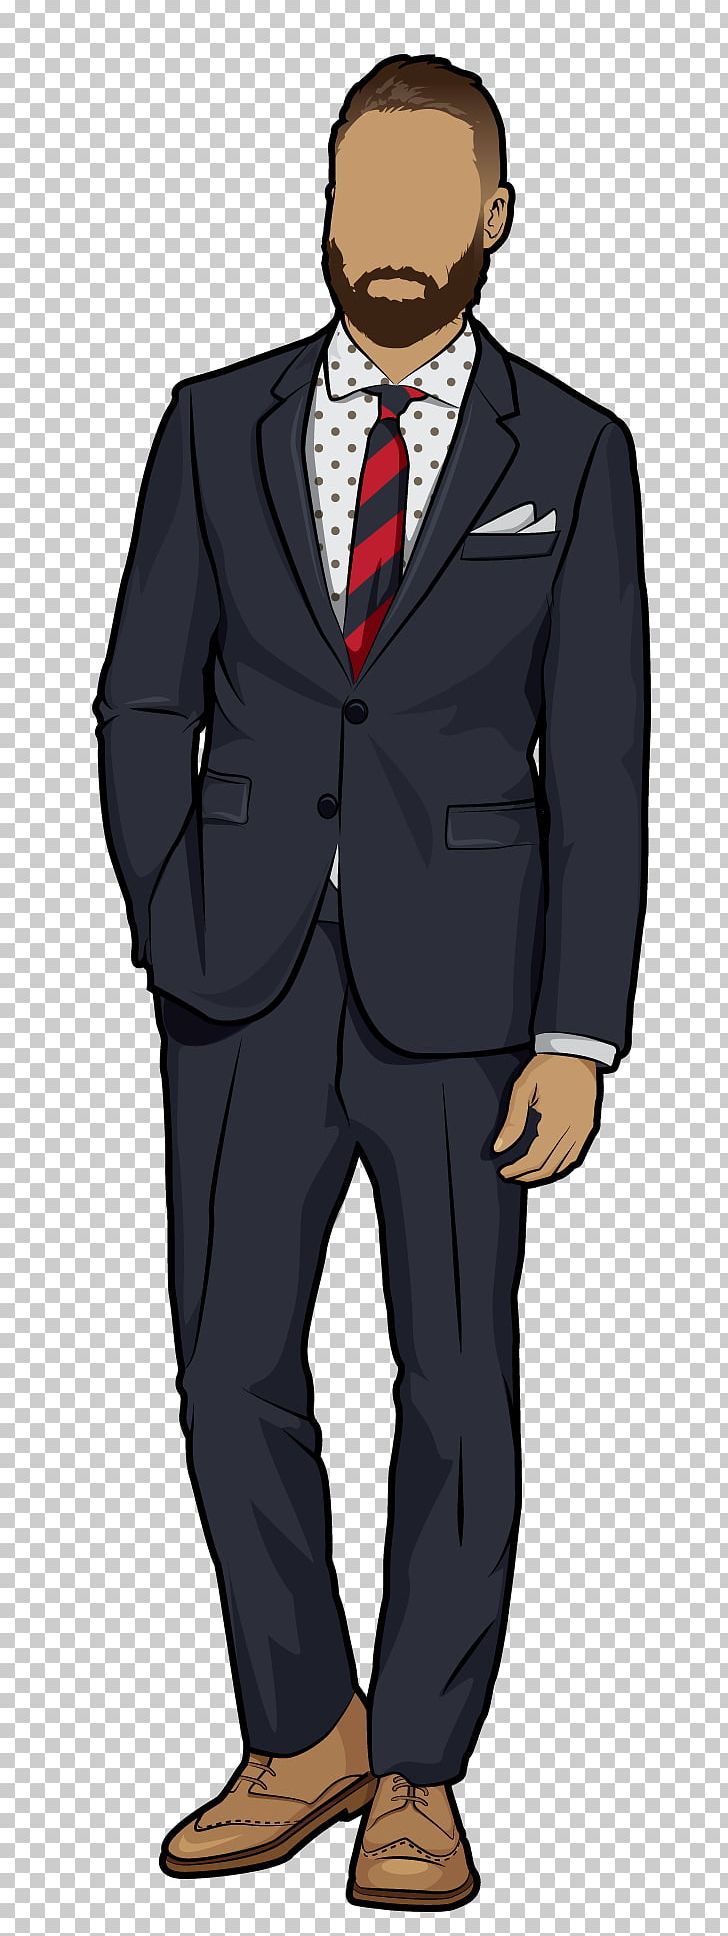 Tuxedo Dress Code Jacket Suit Pants PNG, Clipart, Blazer, Casual, Clothing, Dress, Dress Code Free PNG Download